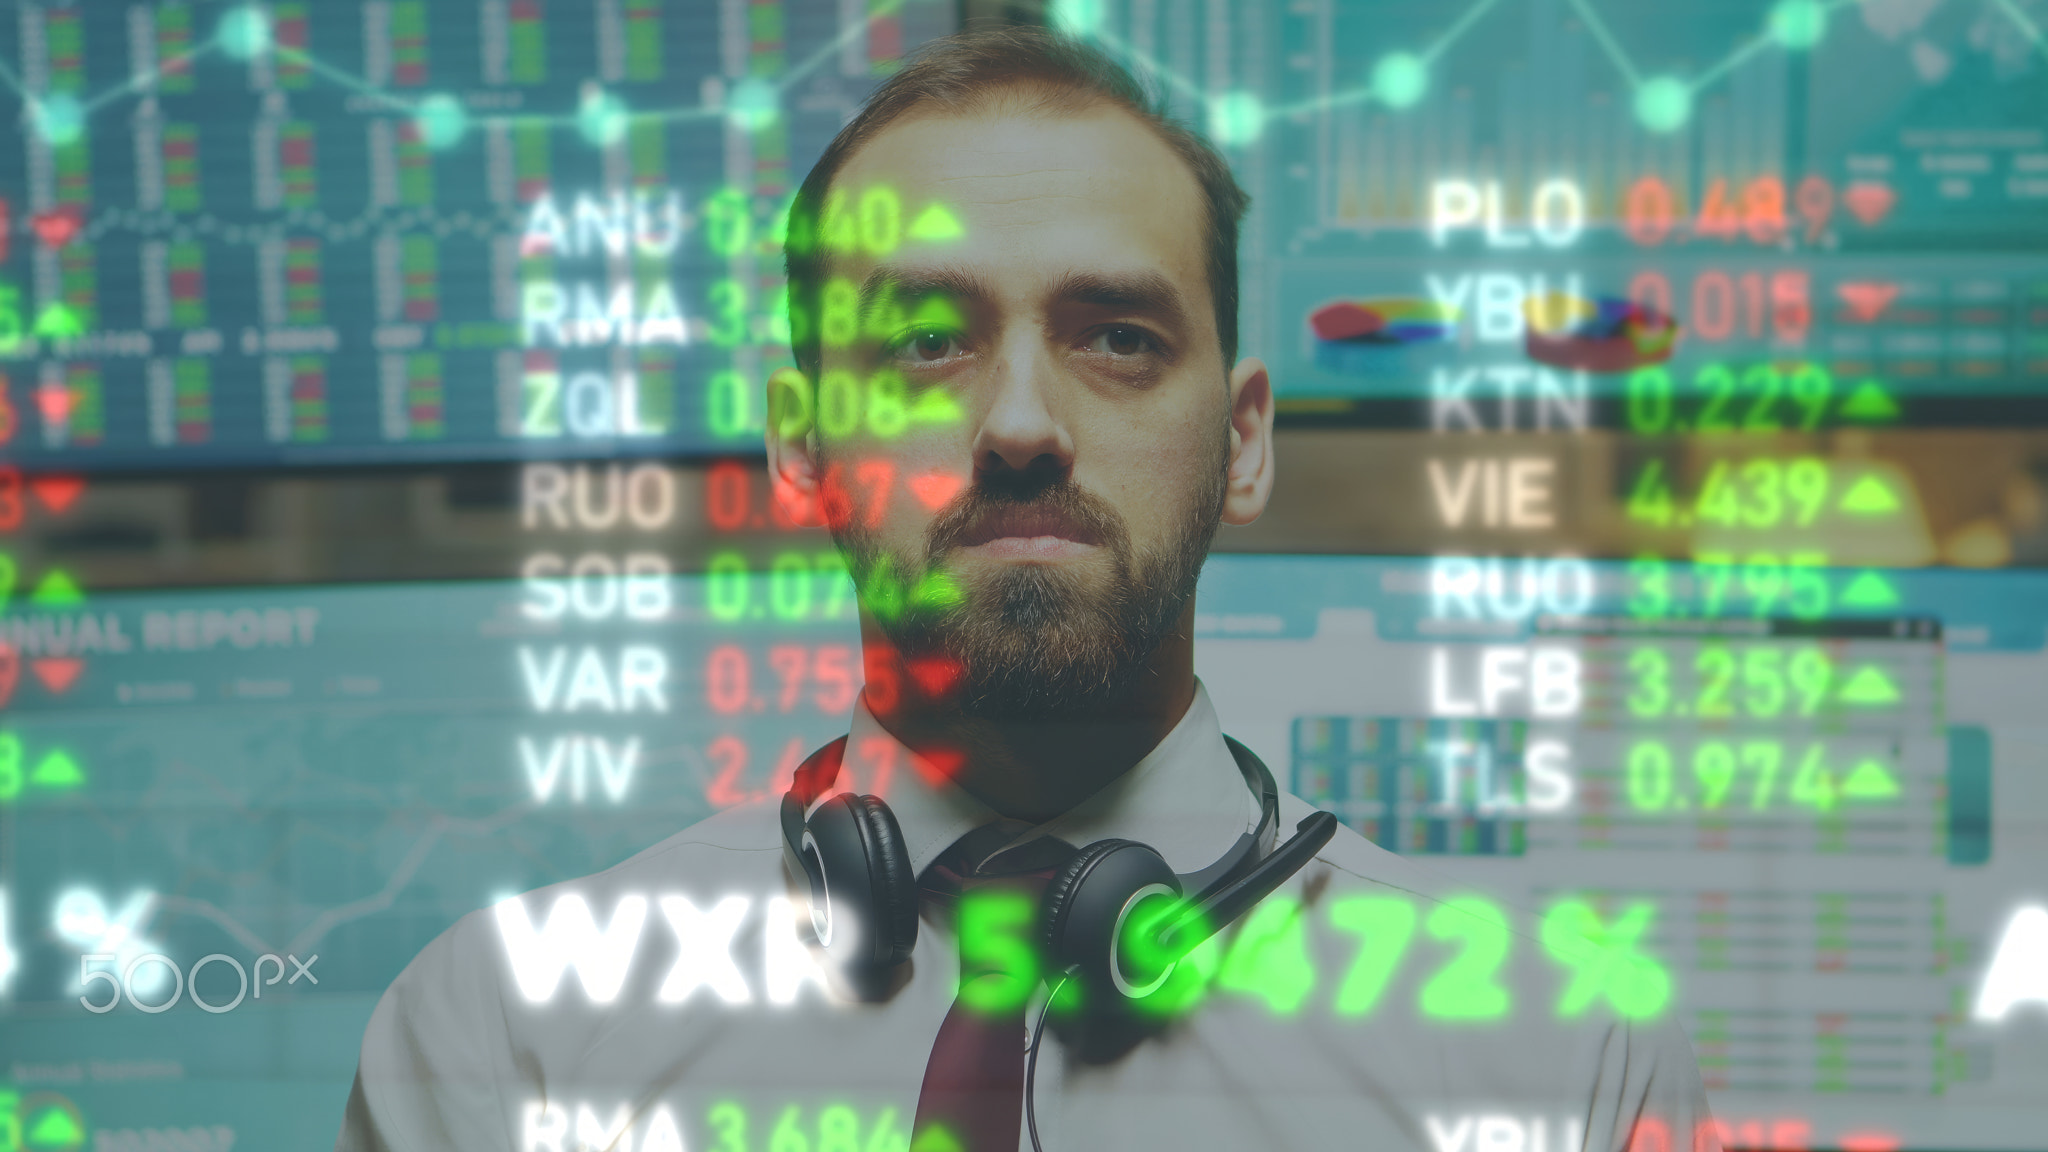 Investor analyzing stock market with AR